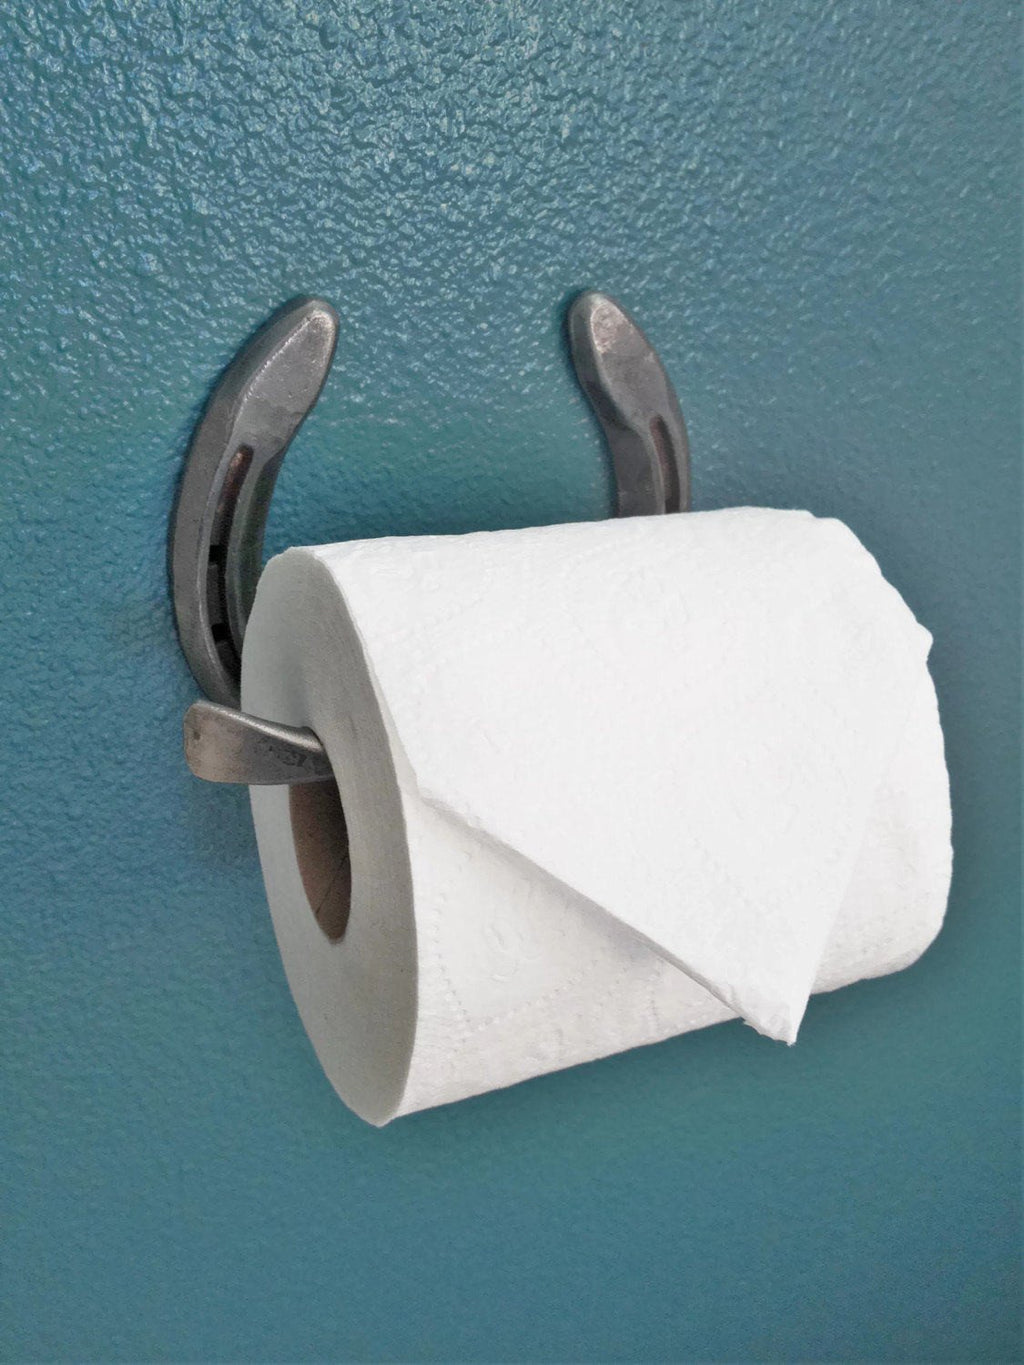 Rustic Horseshoe Toilet Paper Holder - The Heritage Forge